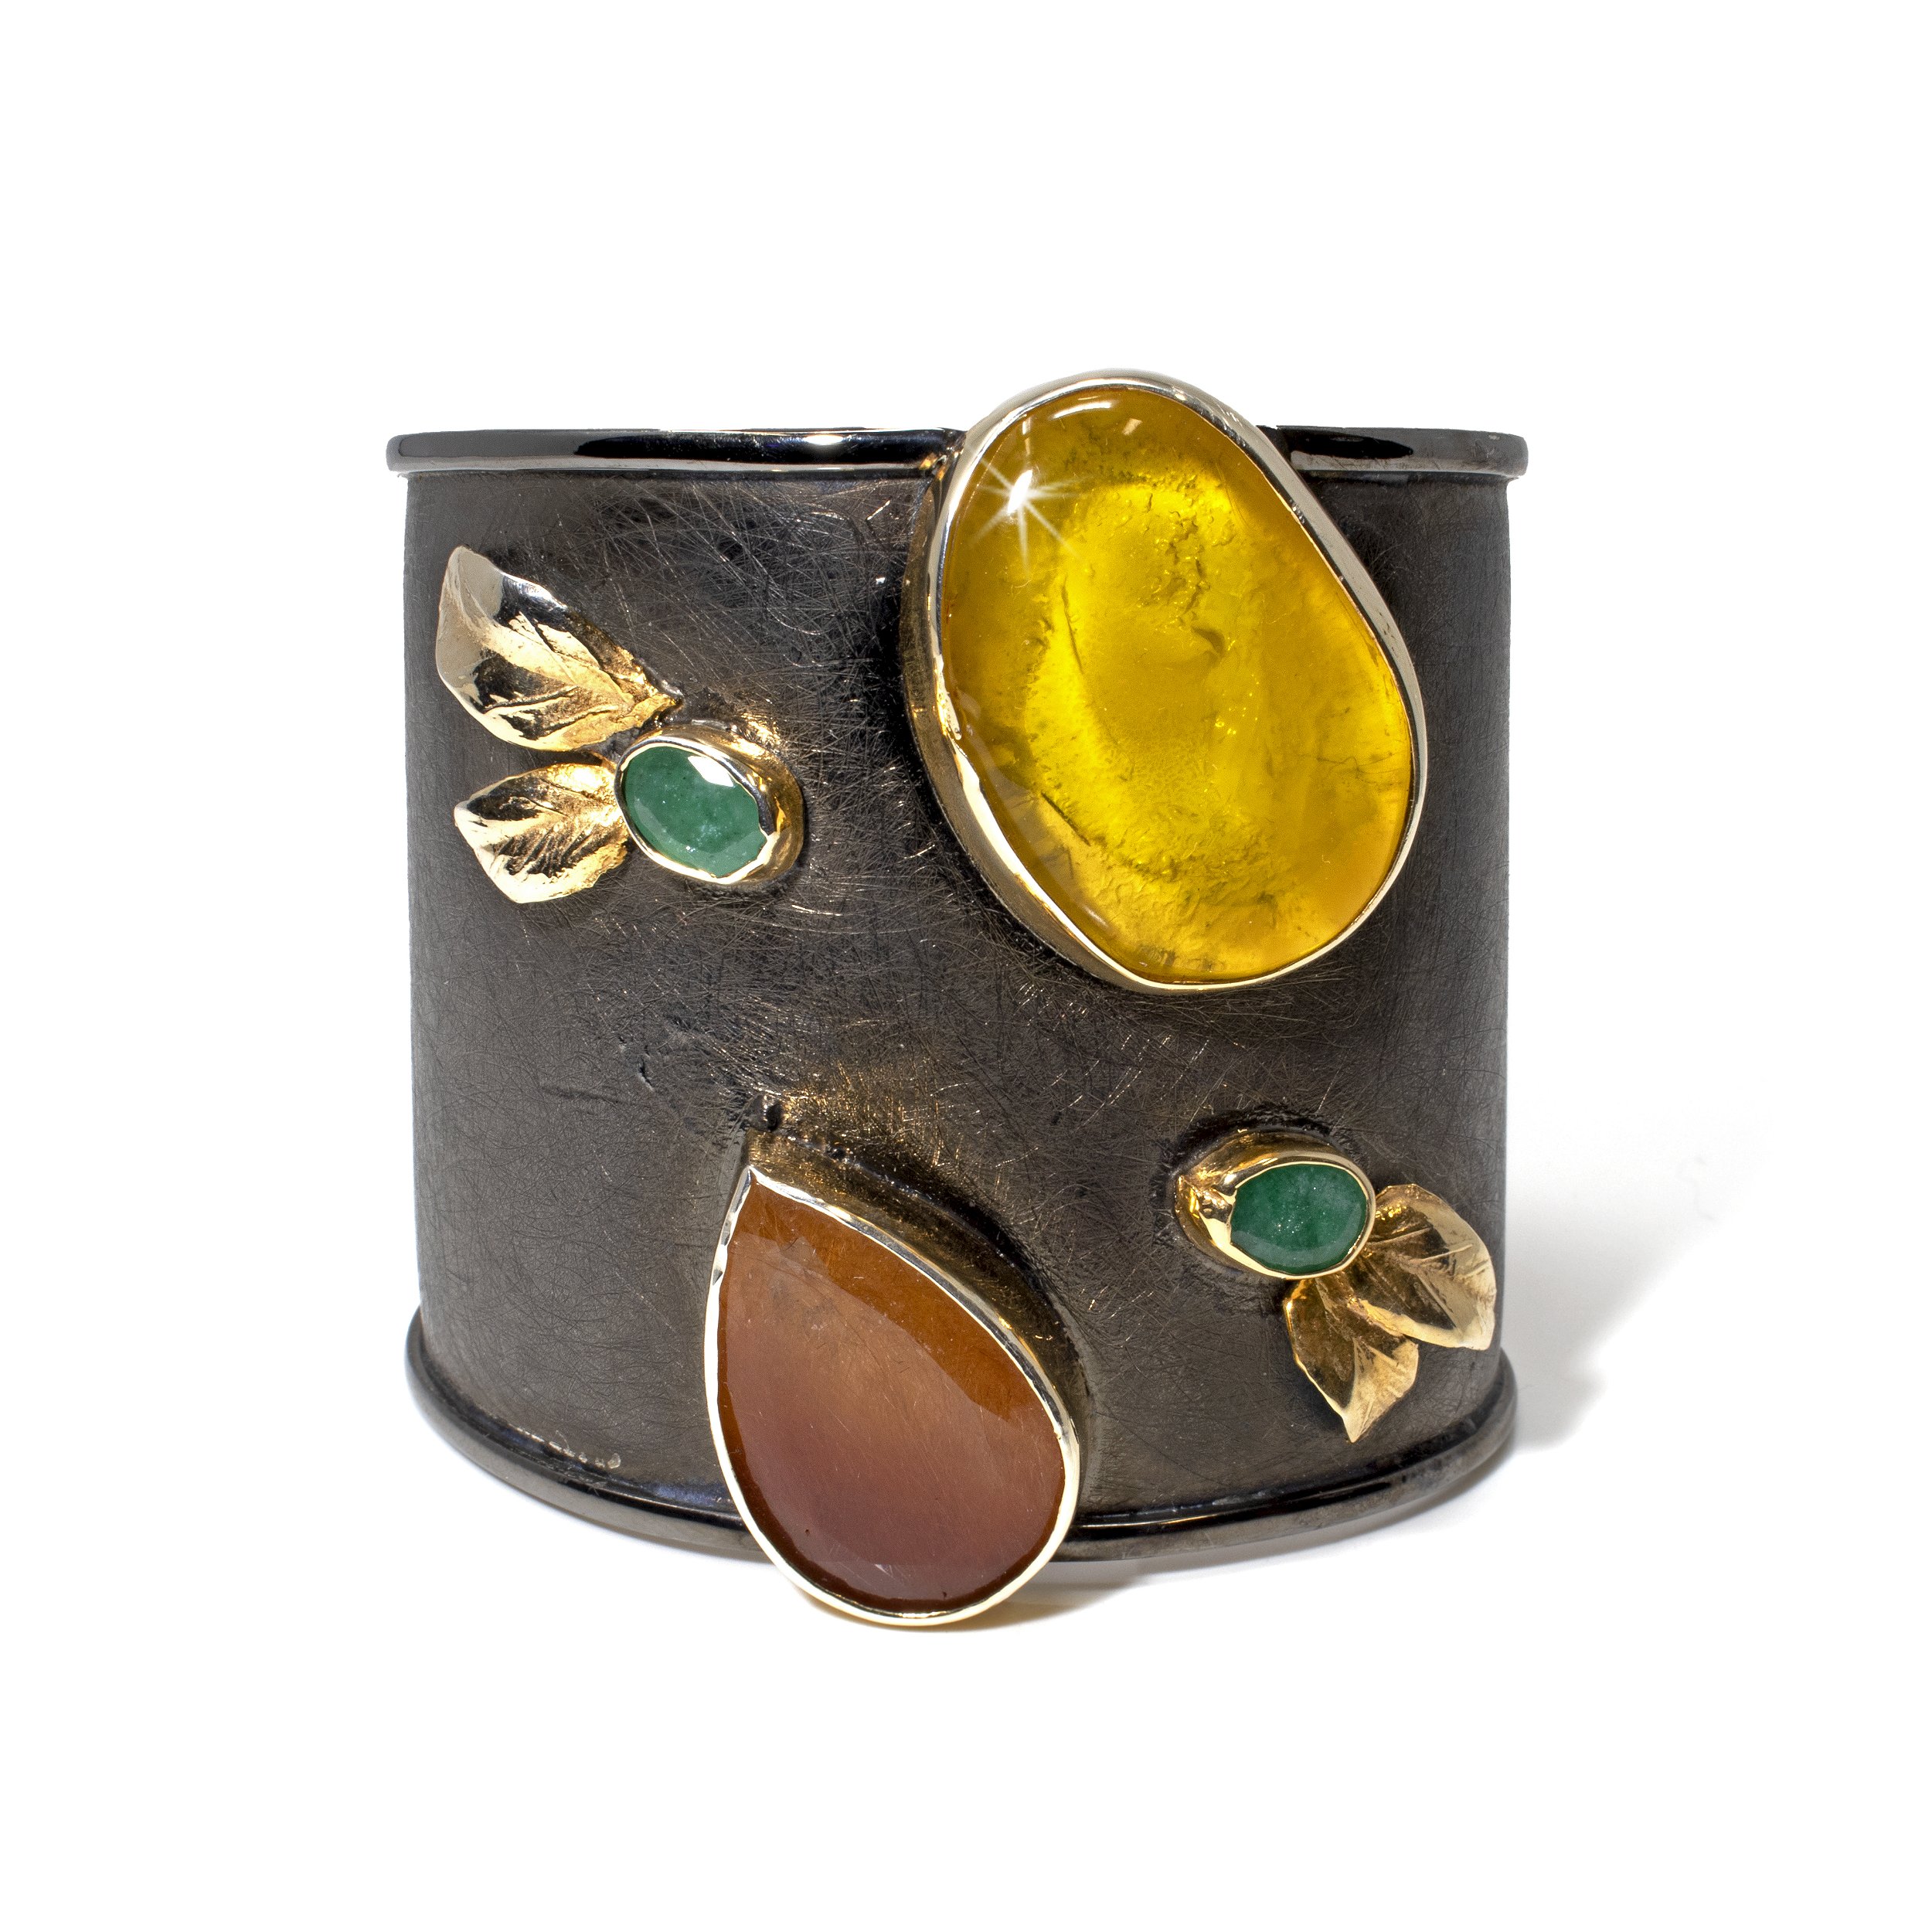 Butterscotch Amber Cuff Bracelet- Freeform Cabochon With Faceted Golden Rutile Pear & 2 Faceted Emerald Ovals Set On Oxidized Sterling Silver Cuff With Gold Vermeil Bezels & Leaves